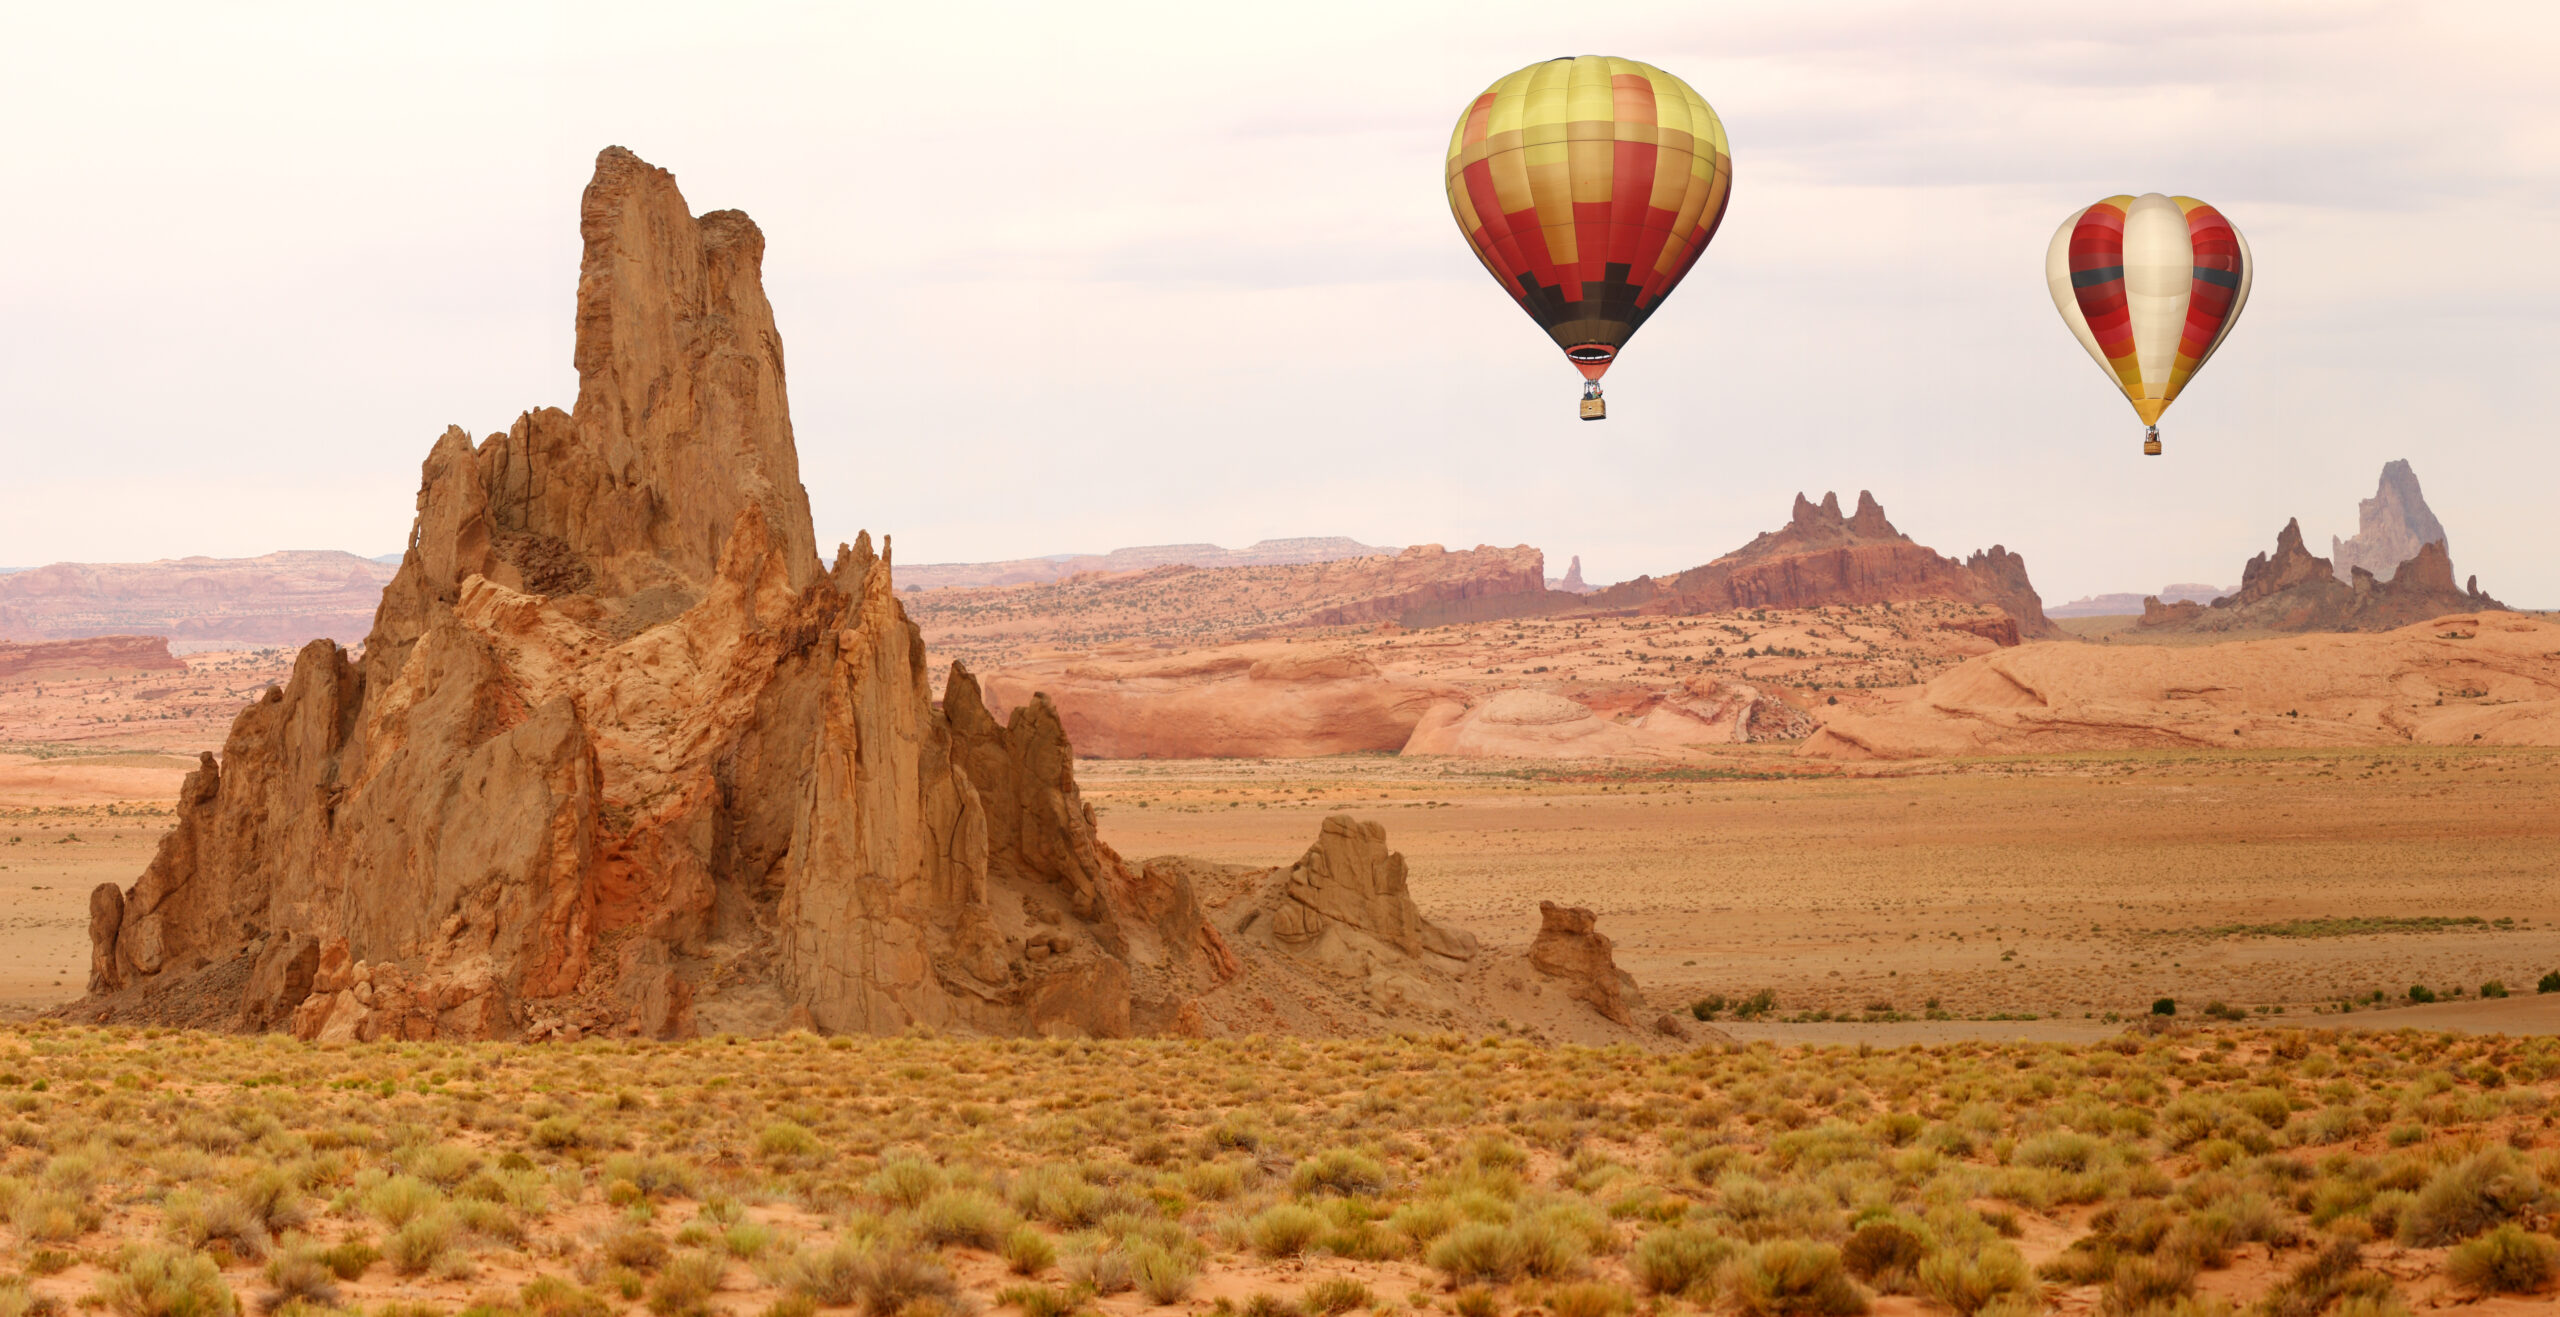 two Hot air balloonsover desert in New Mexico